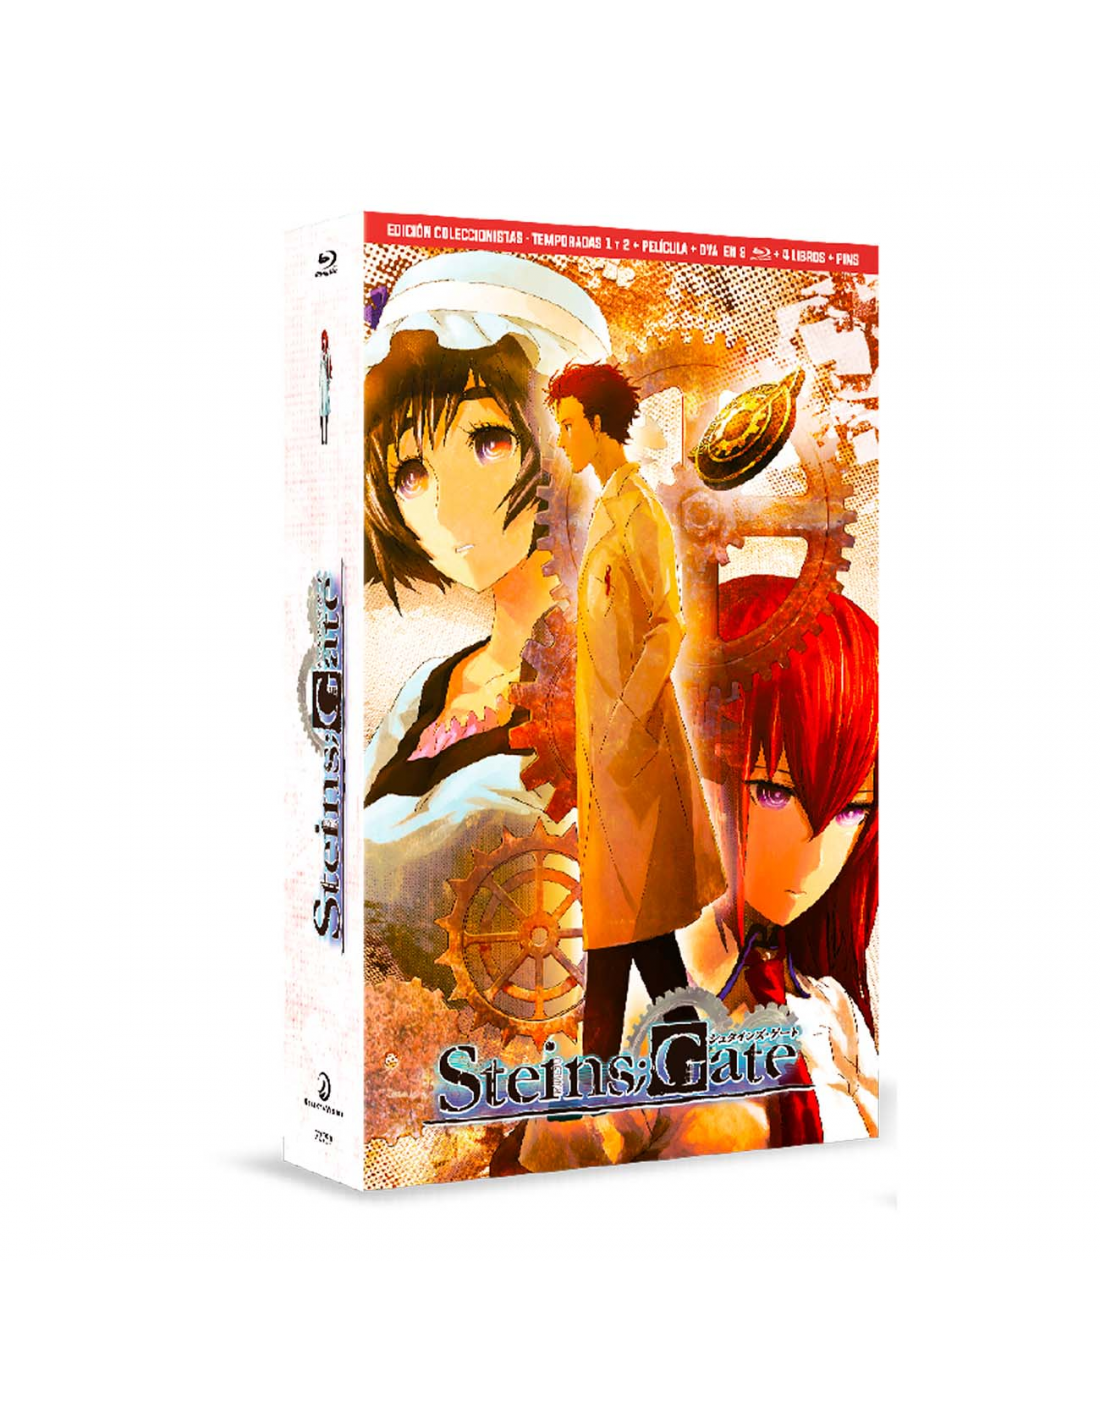 Steins;Gate - Intégrale + Film - Edition Collector Limitée - Combo [Blu-ray]  + DVD - Cdiscount DVD